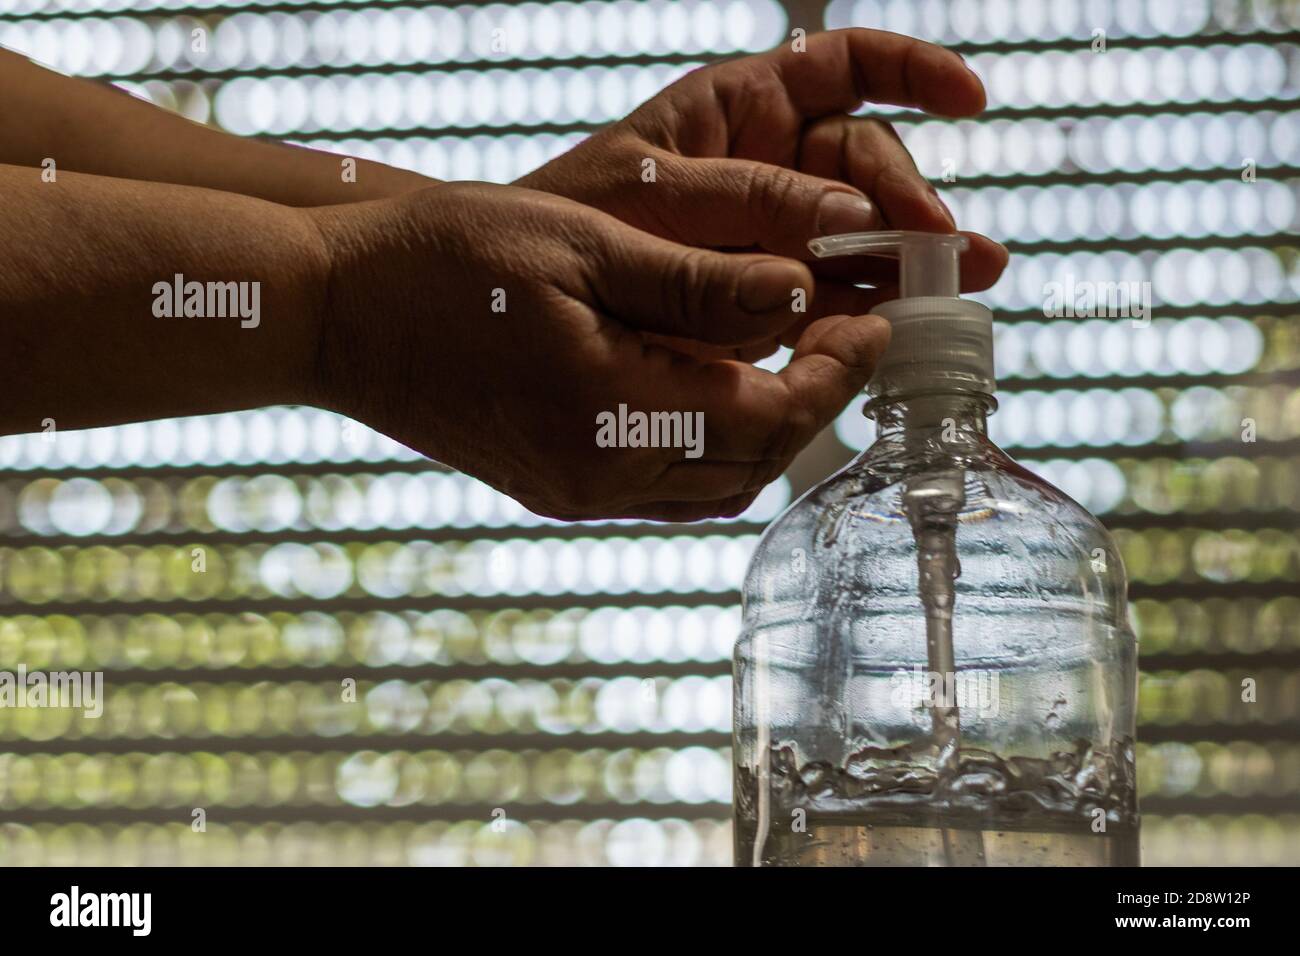 Closeup shot of hands pumping sanitizer out of a plastic botte Stock Photo  - Alamy